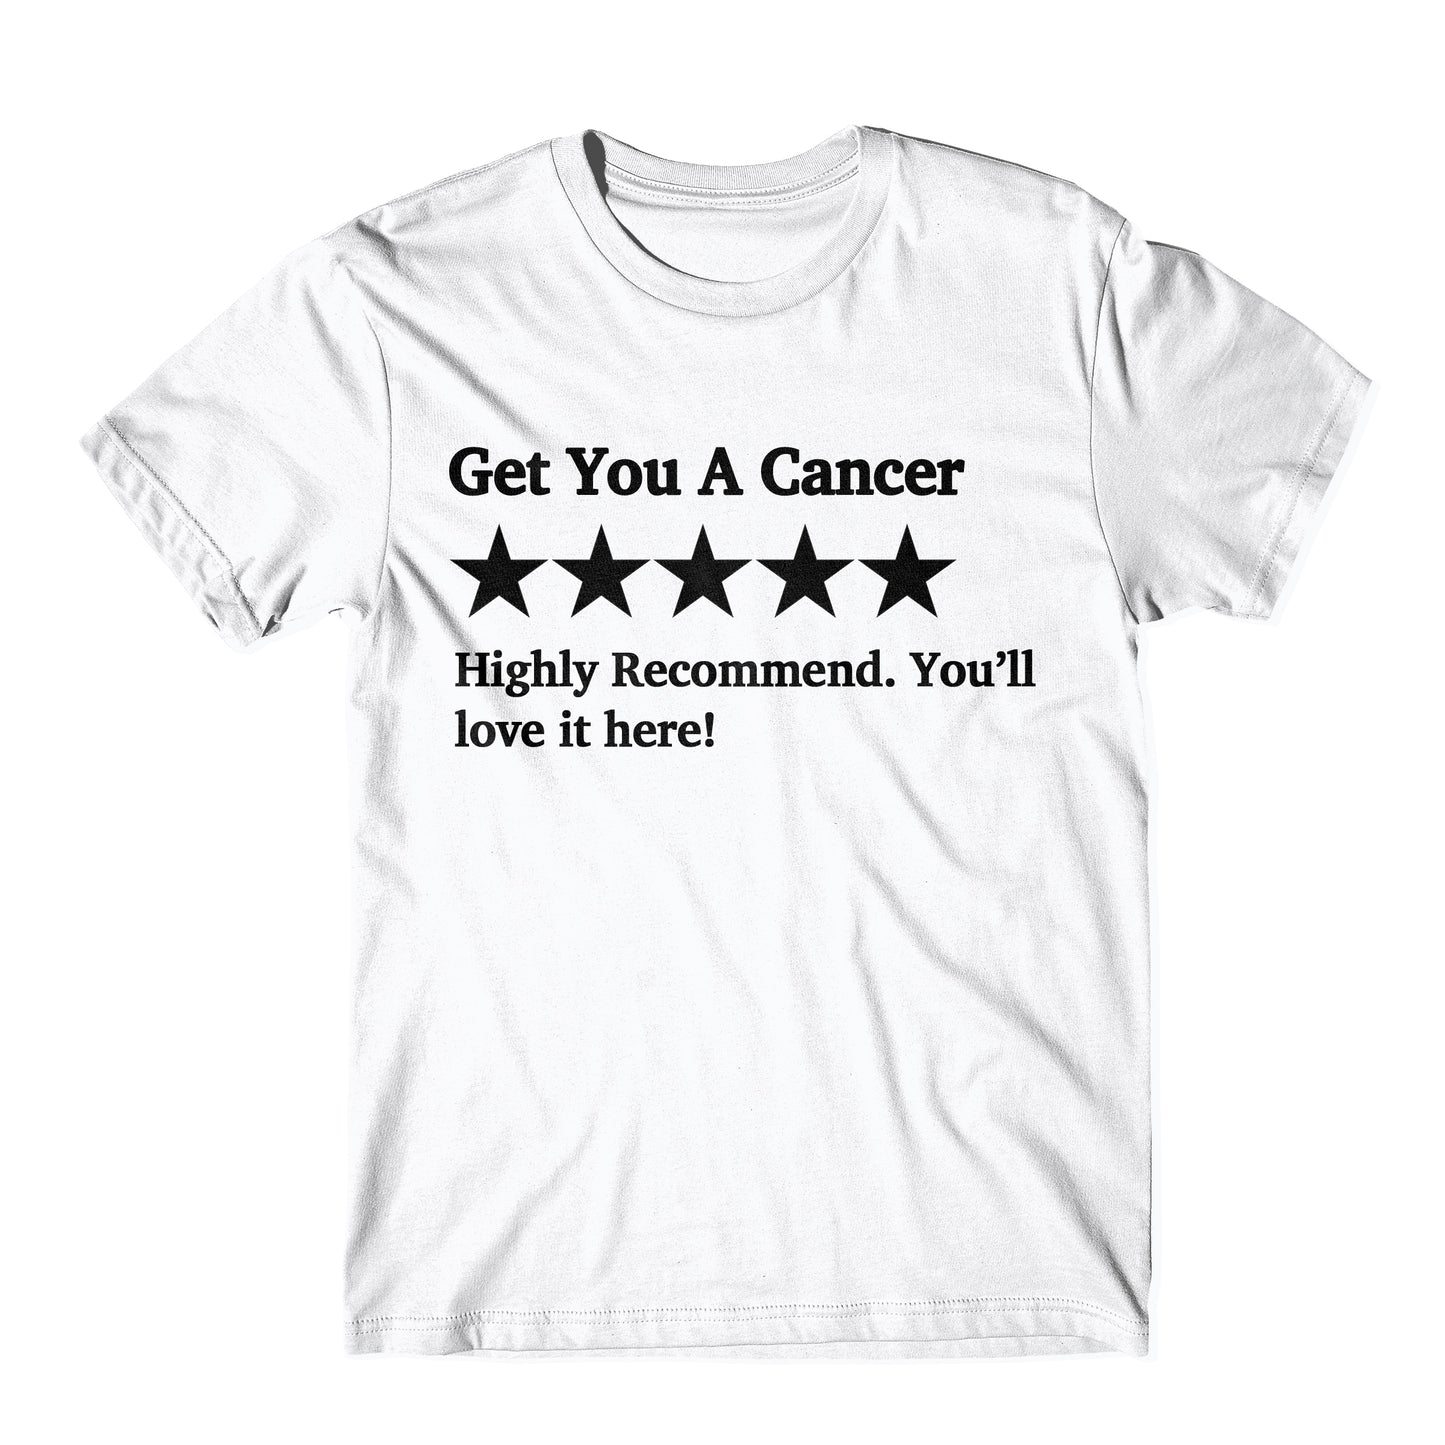 "Get You A Cancer Five Star Rating" Tee